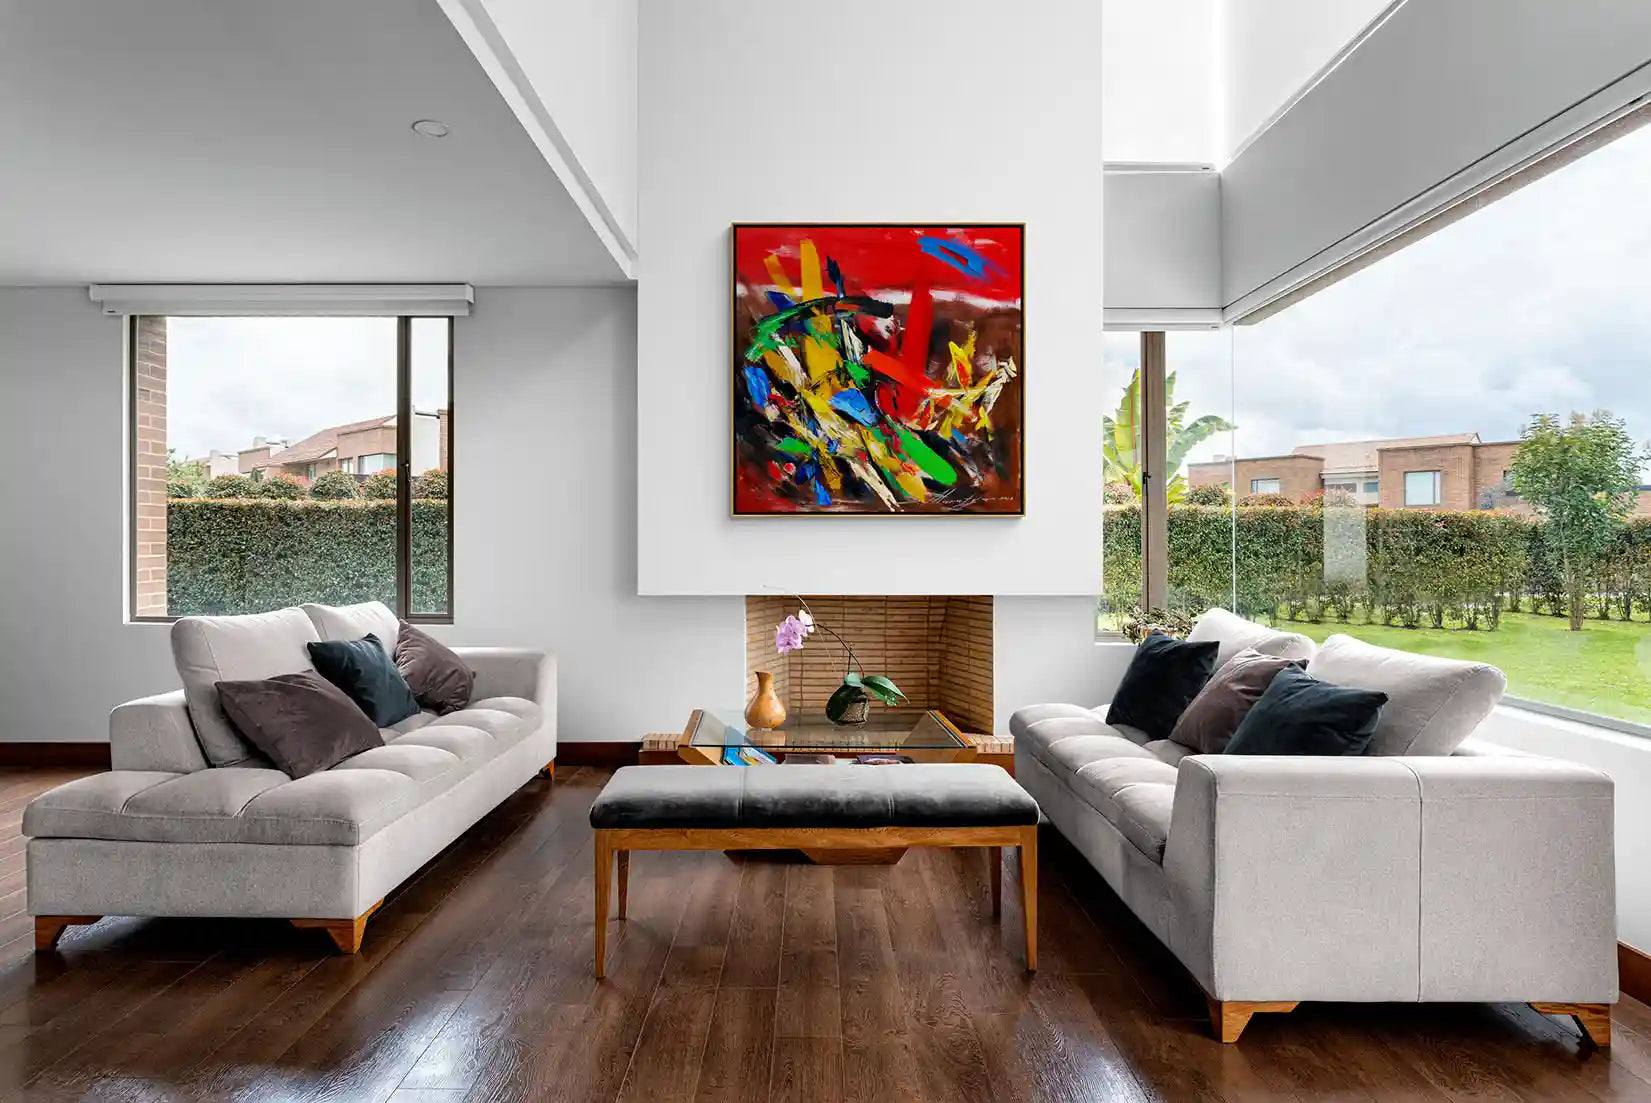 Spacious and inviting living room with expansive windows showcasing a verdant garden view, complemented by a striking abstract artwork by Armenian artist Samvel Marutyan on the wall.